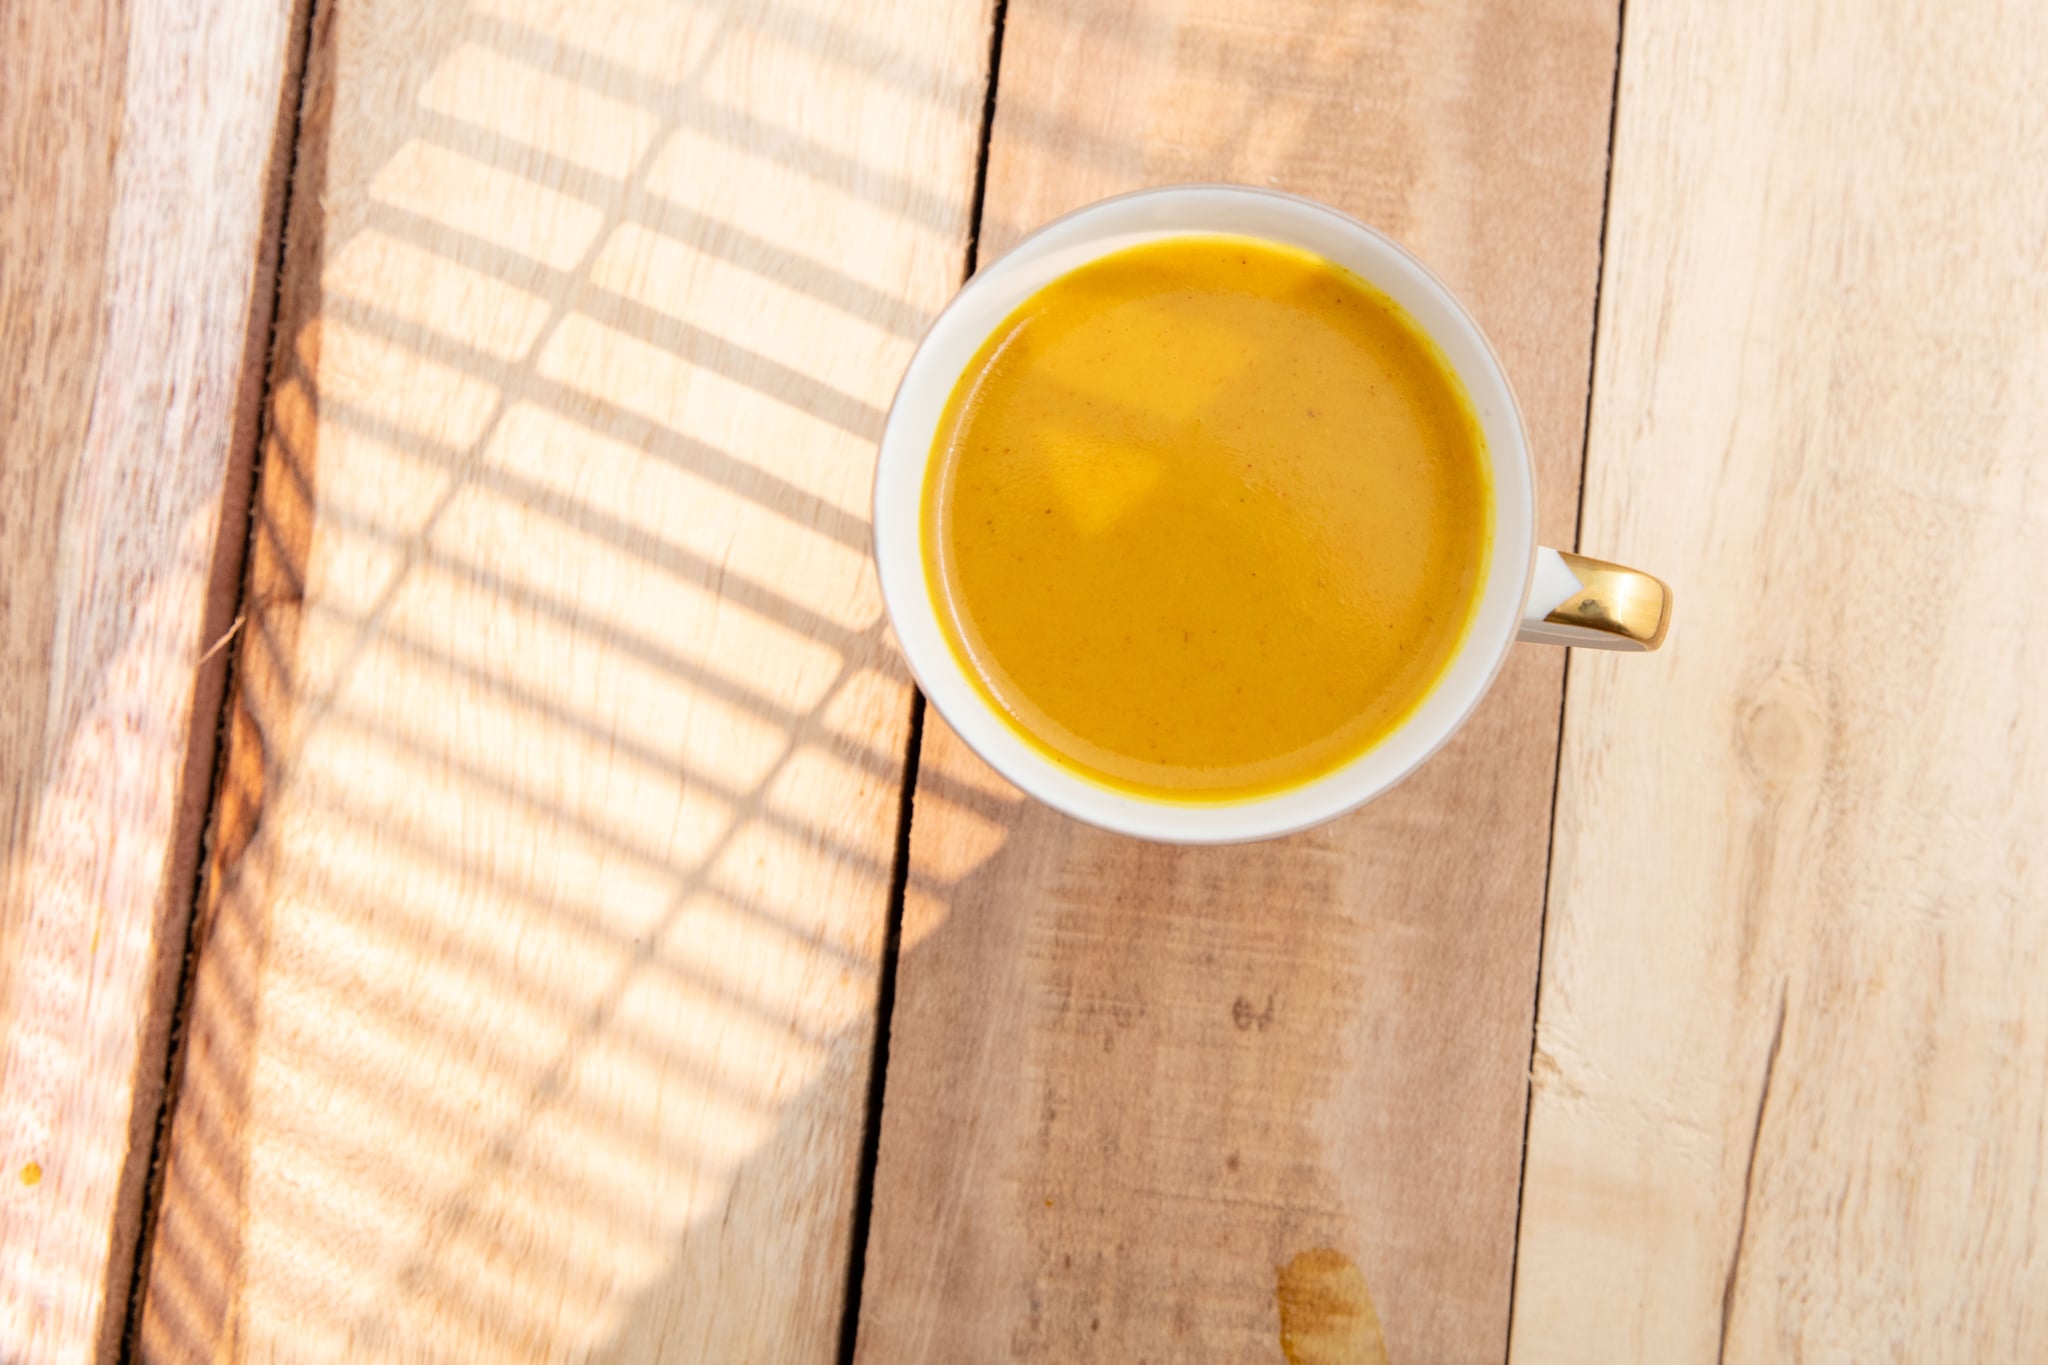 Hot turmeric latte. Served in white cup. Wooden plank. High point of view.